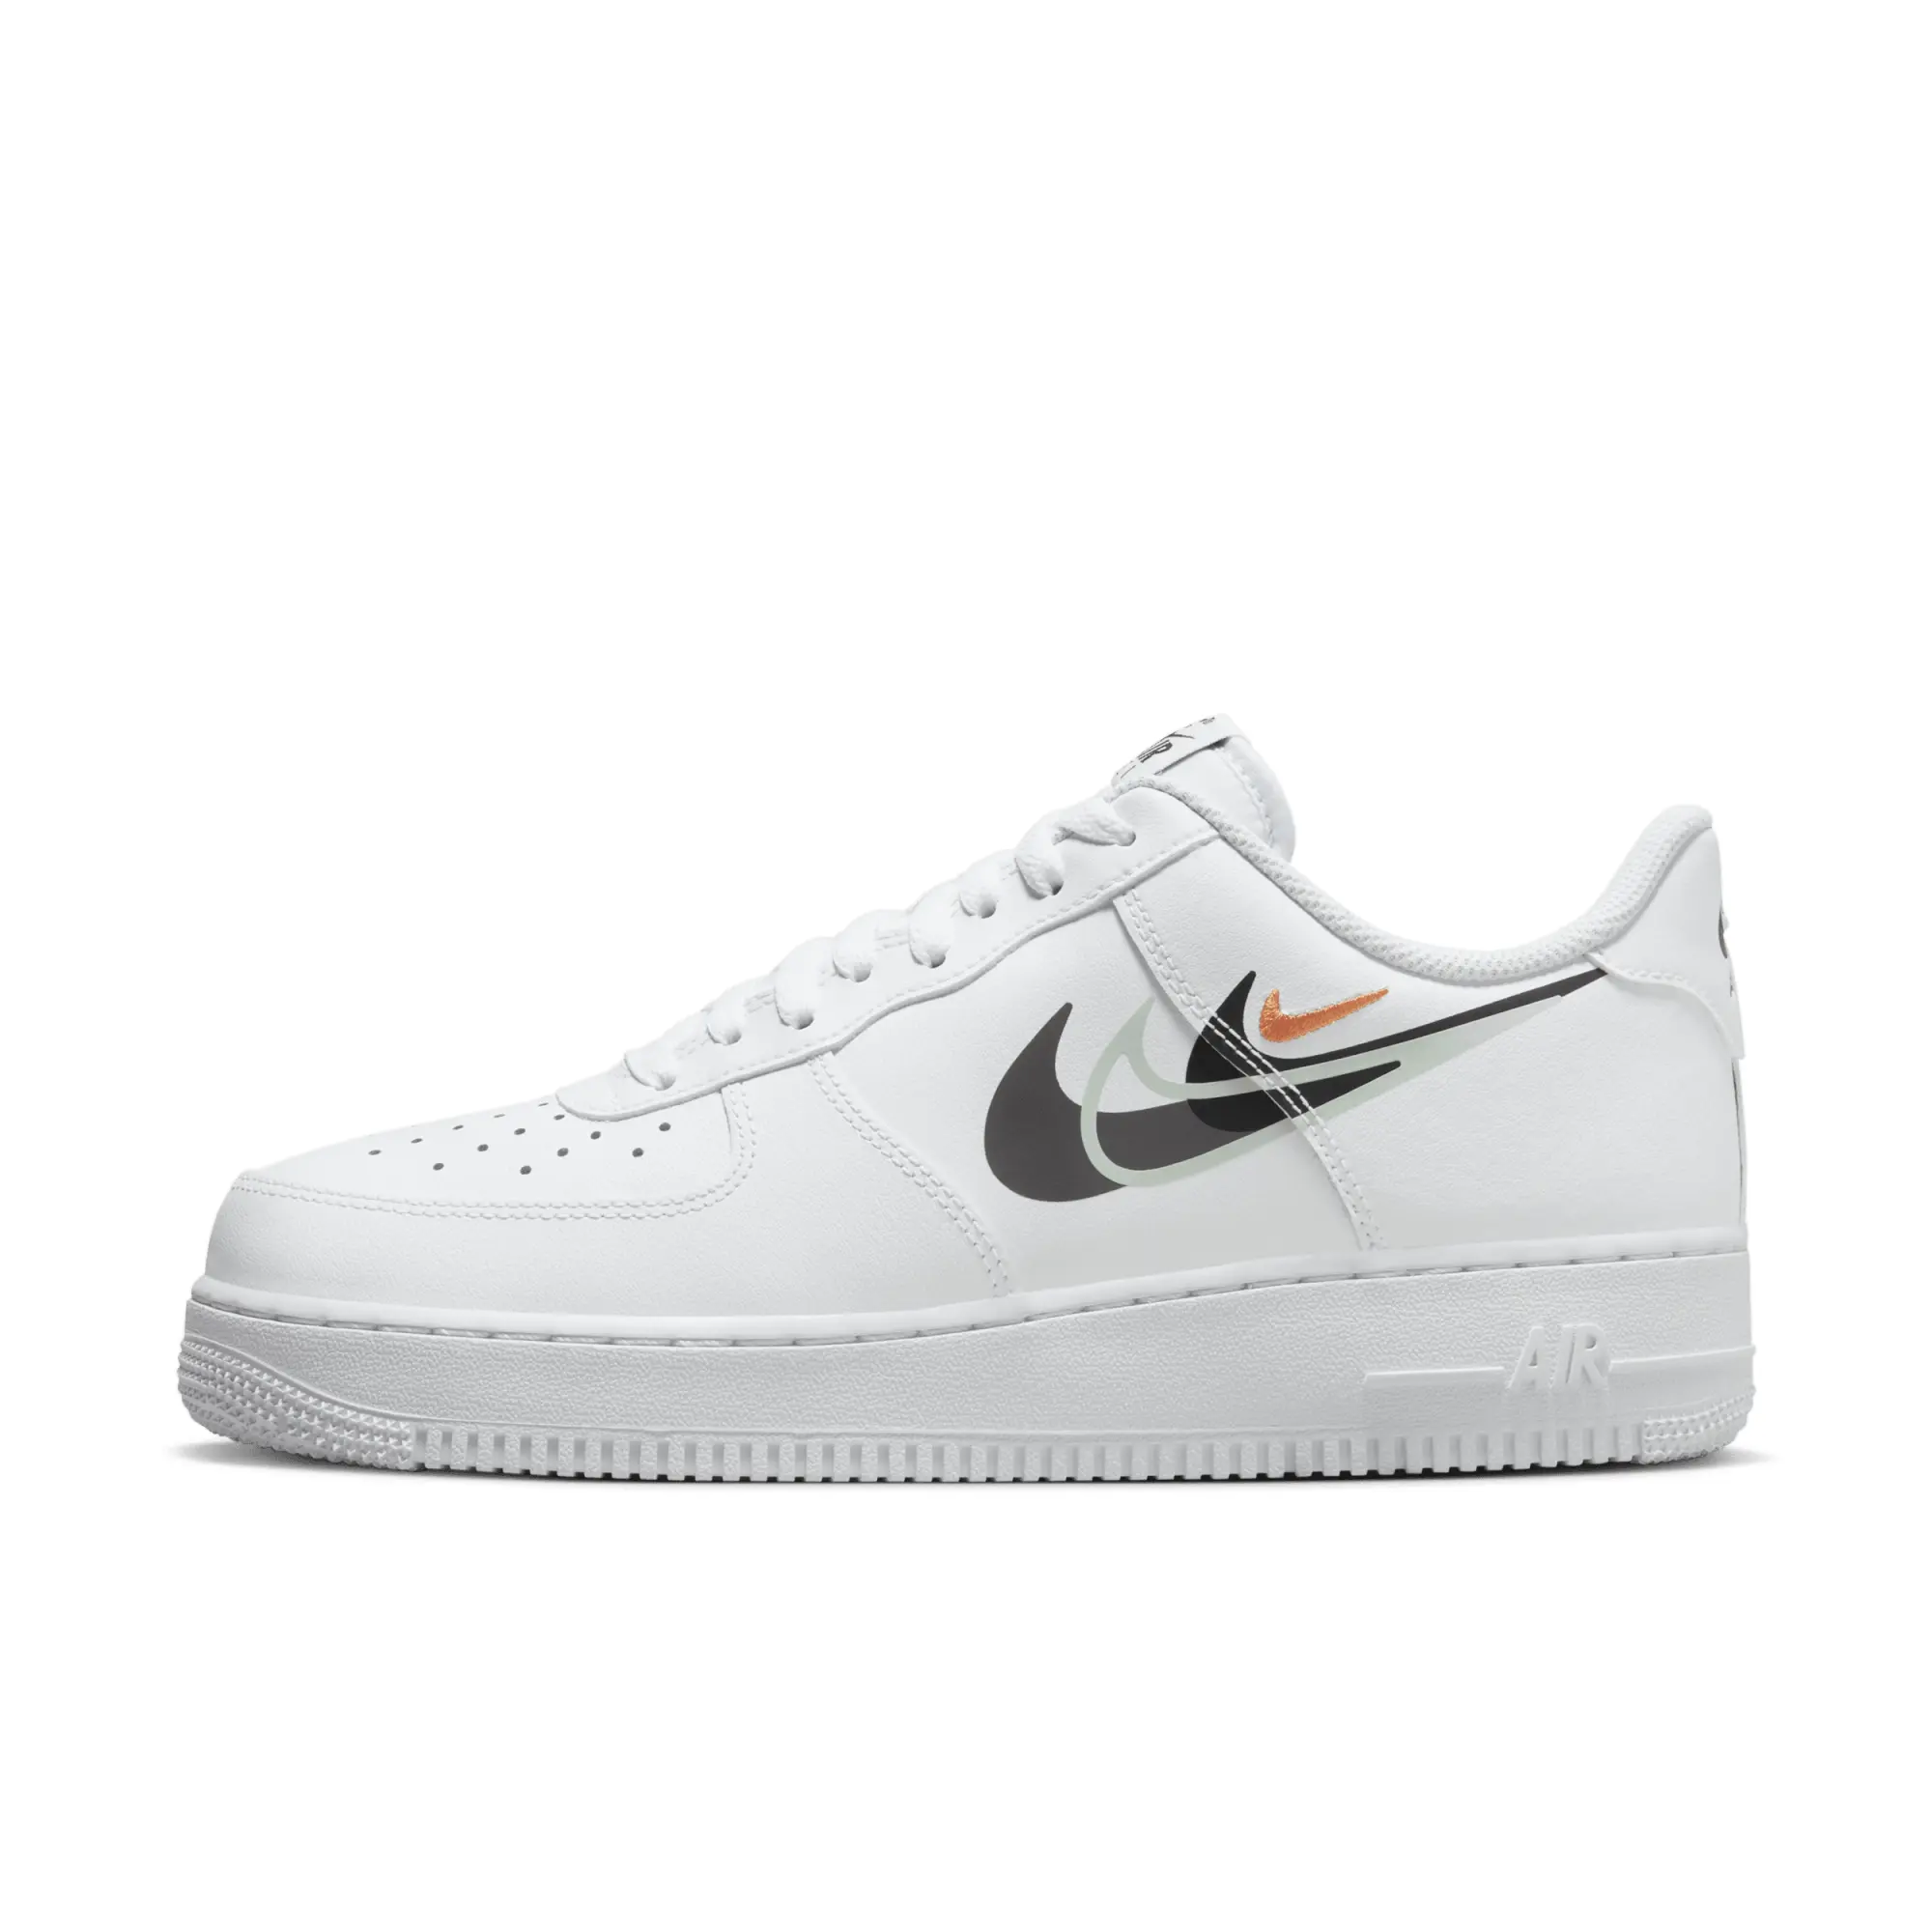 Nike Air Force 1 '07 Stacked Swoosh Trainers In White And Black